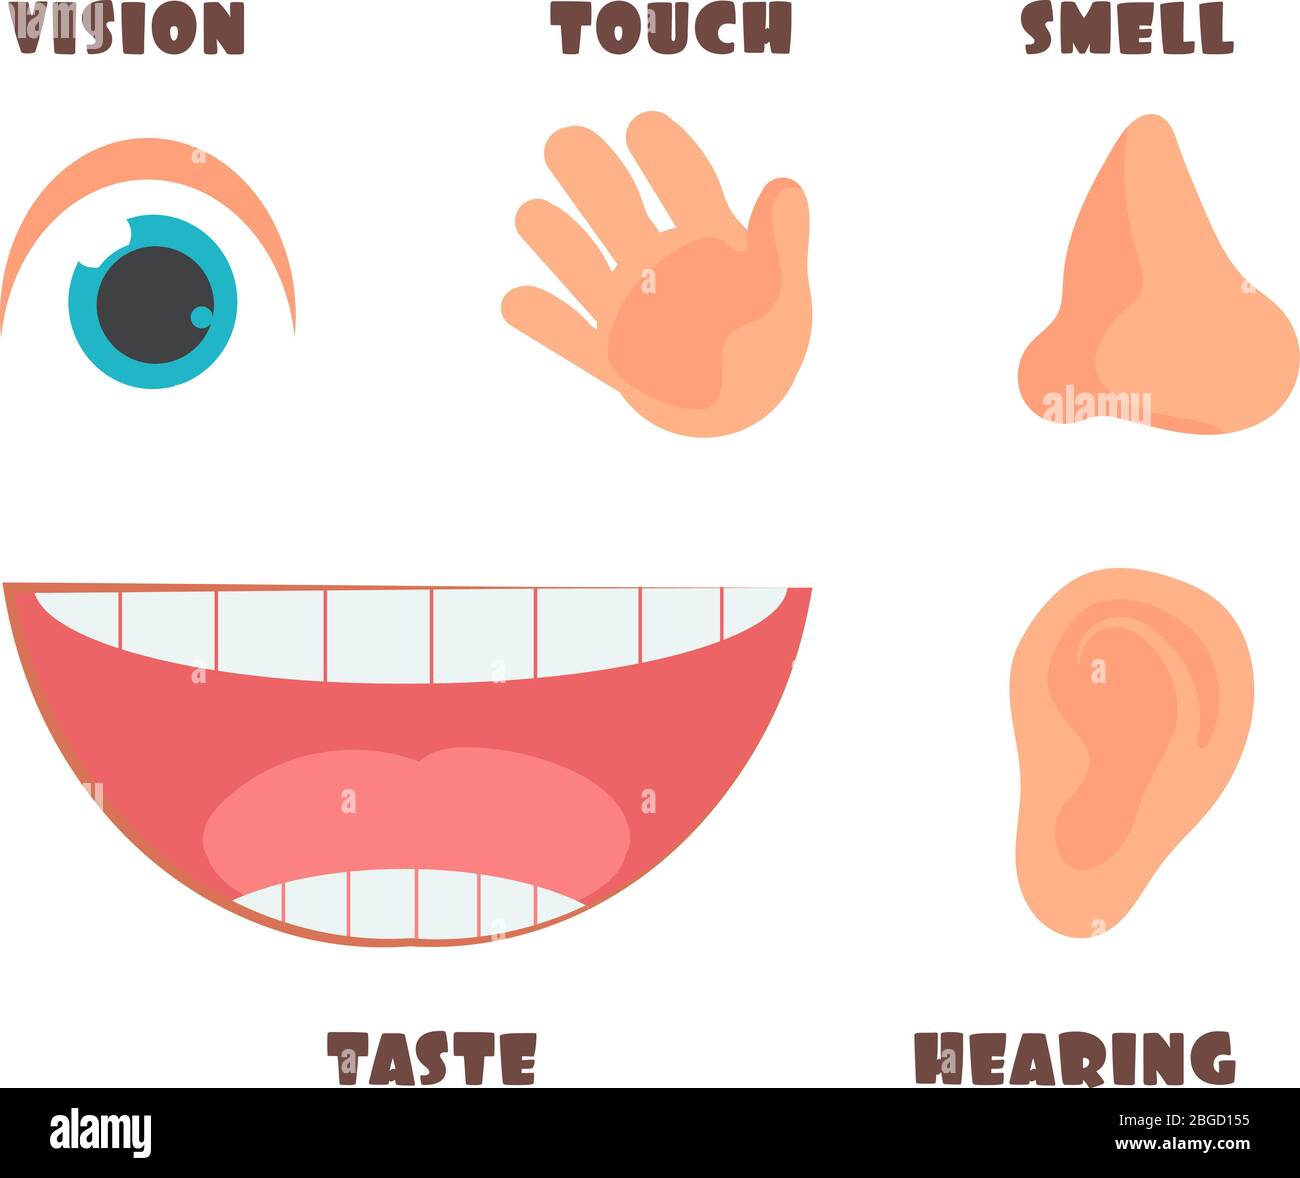 Human senses cartoon vector icons with eye, nose, ear, hand, and mouth symbols. Human taste and sensory illustration Stock Vector